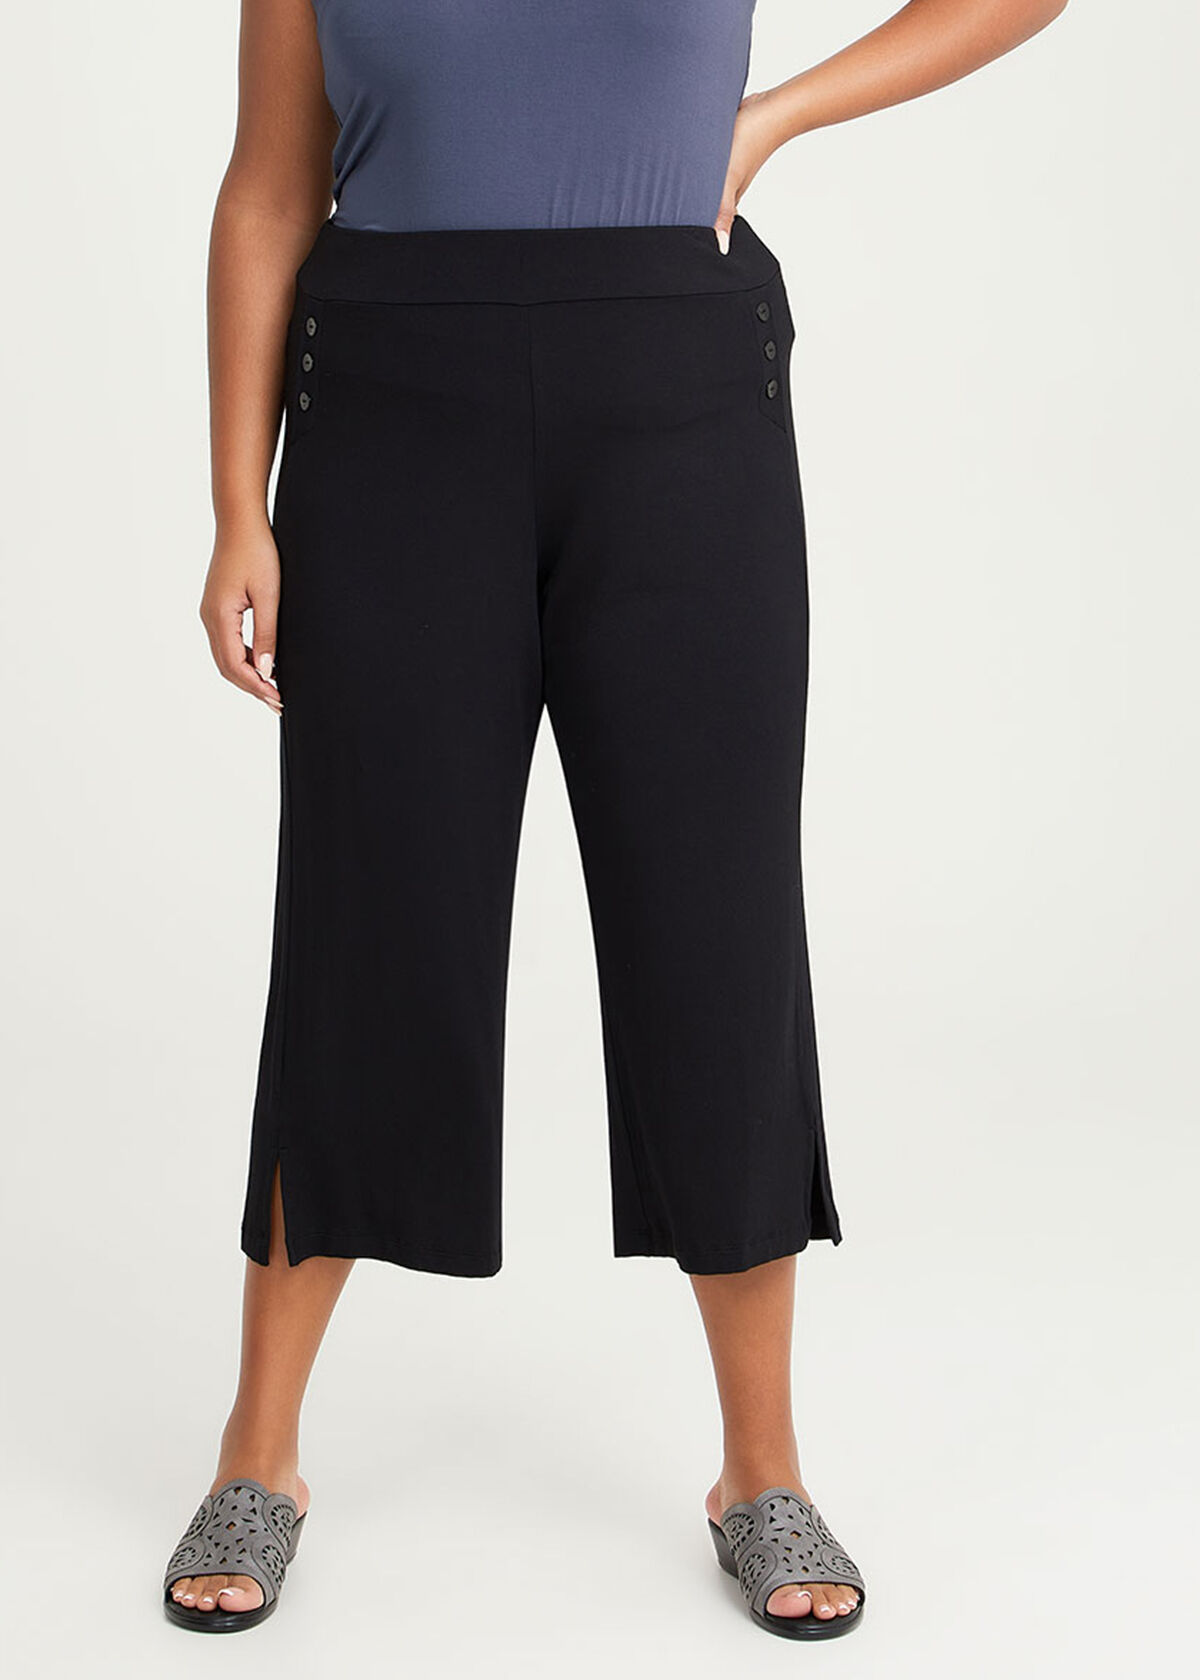 Missguided  Plus Size Wide Leg Trousers  Sage  Missguided